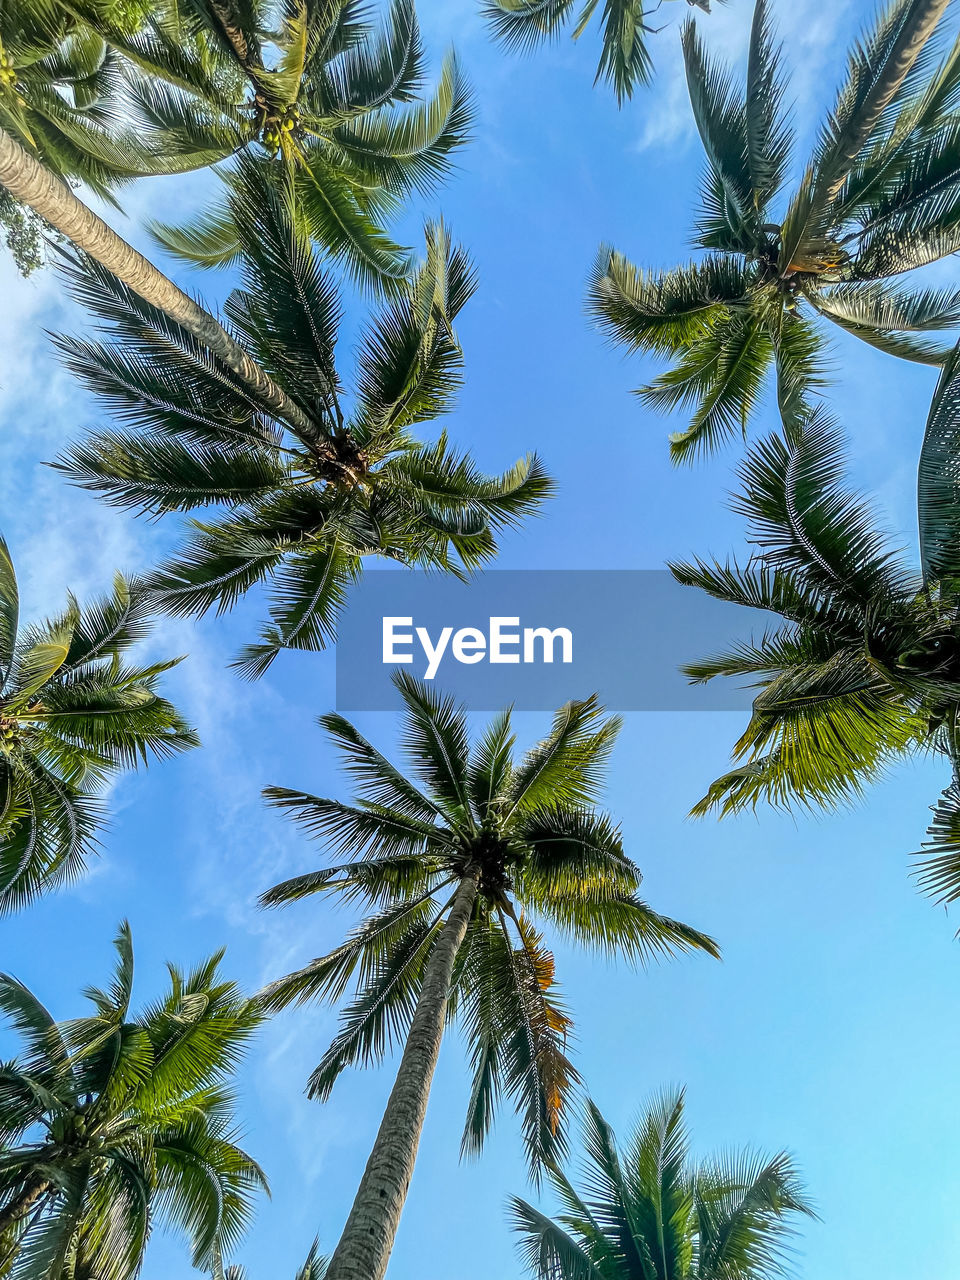 tree, palm tree, tropical climate, plant, sky, nature, low angle view, beauty in nature, no people, growth, borassus flabellifer, blue, tropical tree, tropics, tranquility, leaf, branch, outdoors, day, coconut palm tree, palm leaf, scenics - nature, green, vegetation, directly below, clear sky, backgrounds, land, sunny, idyllic, travel destinations, sunlight, tree trunk, environment, trunk, flower